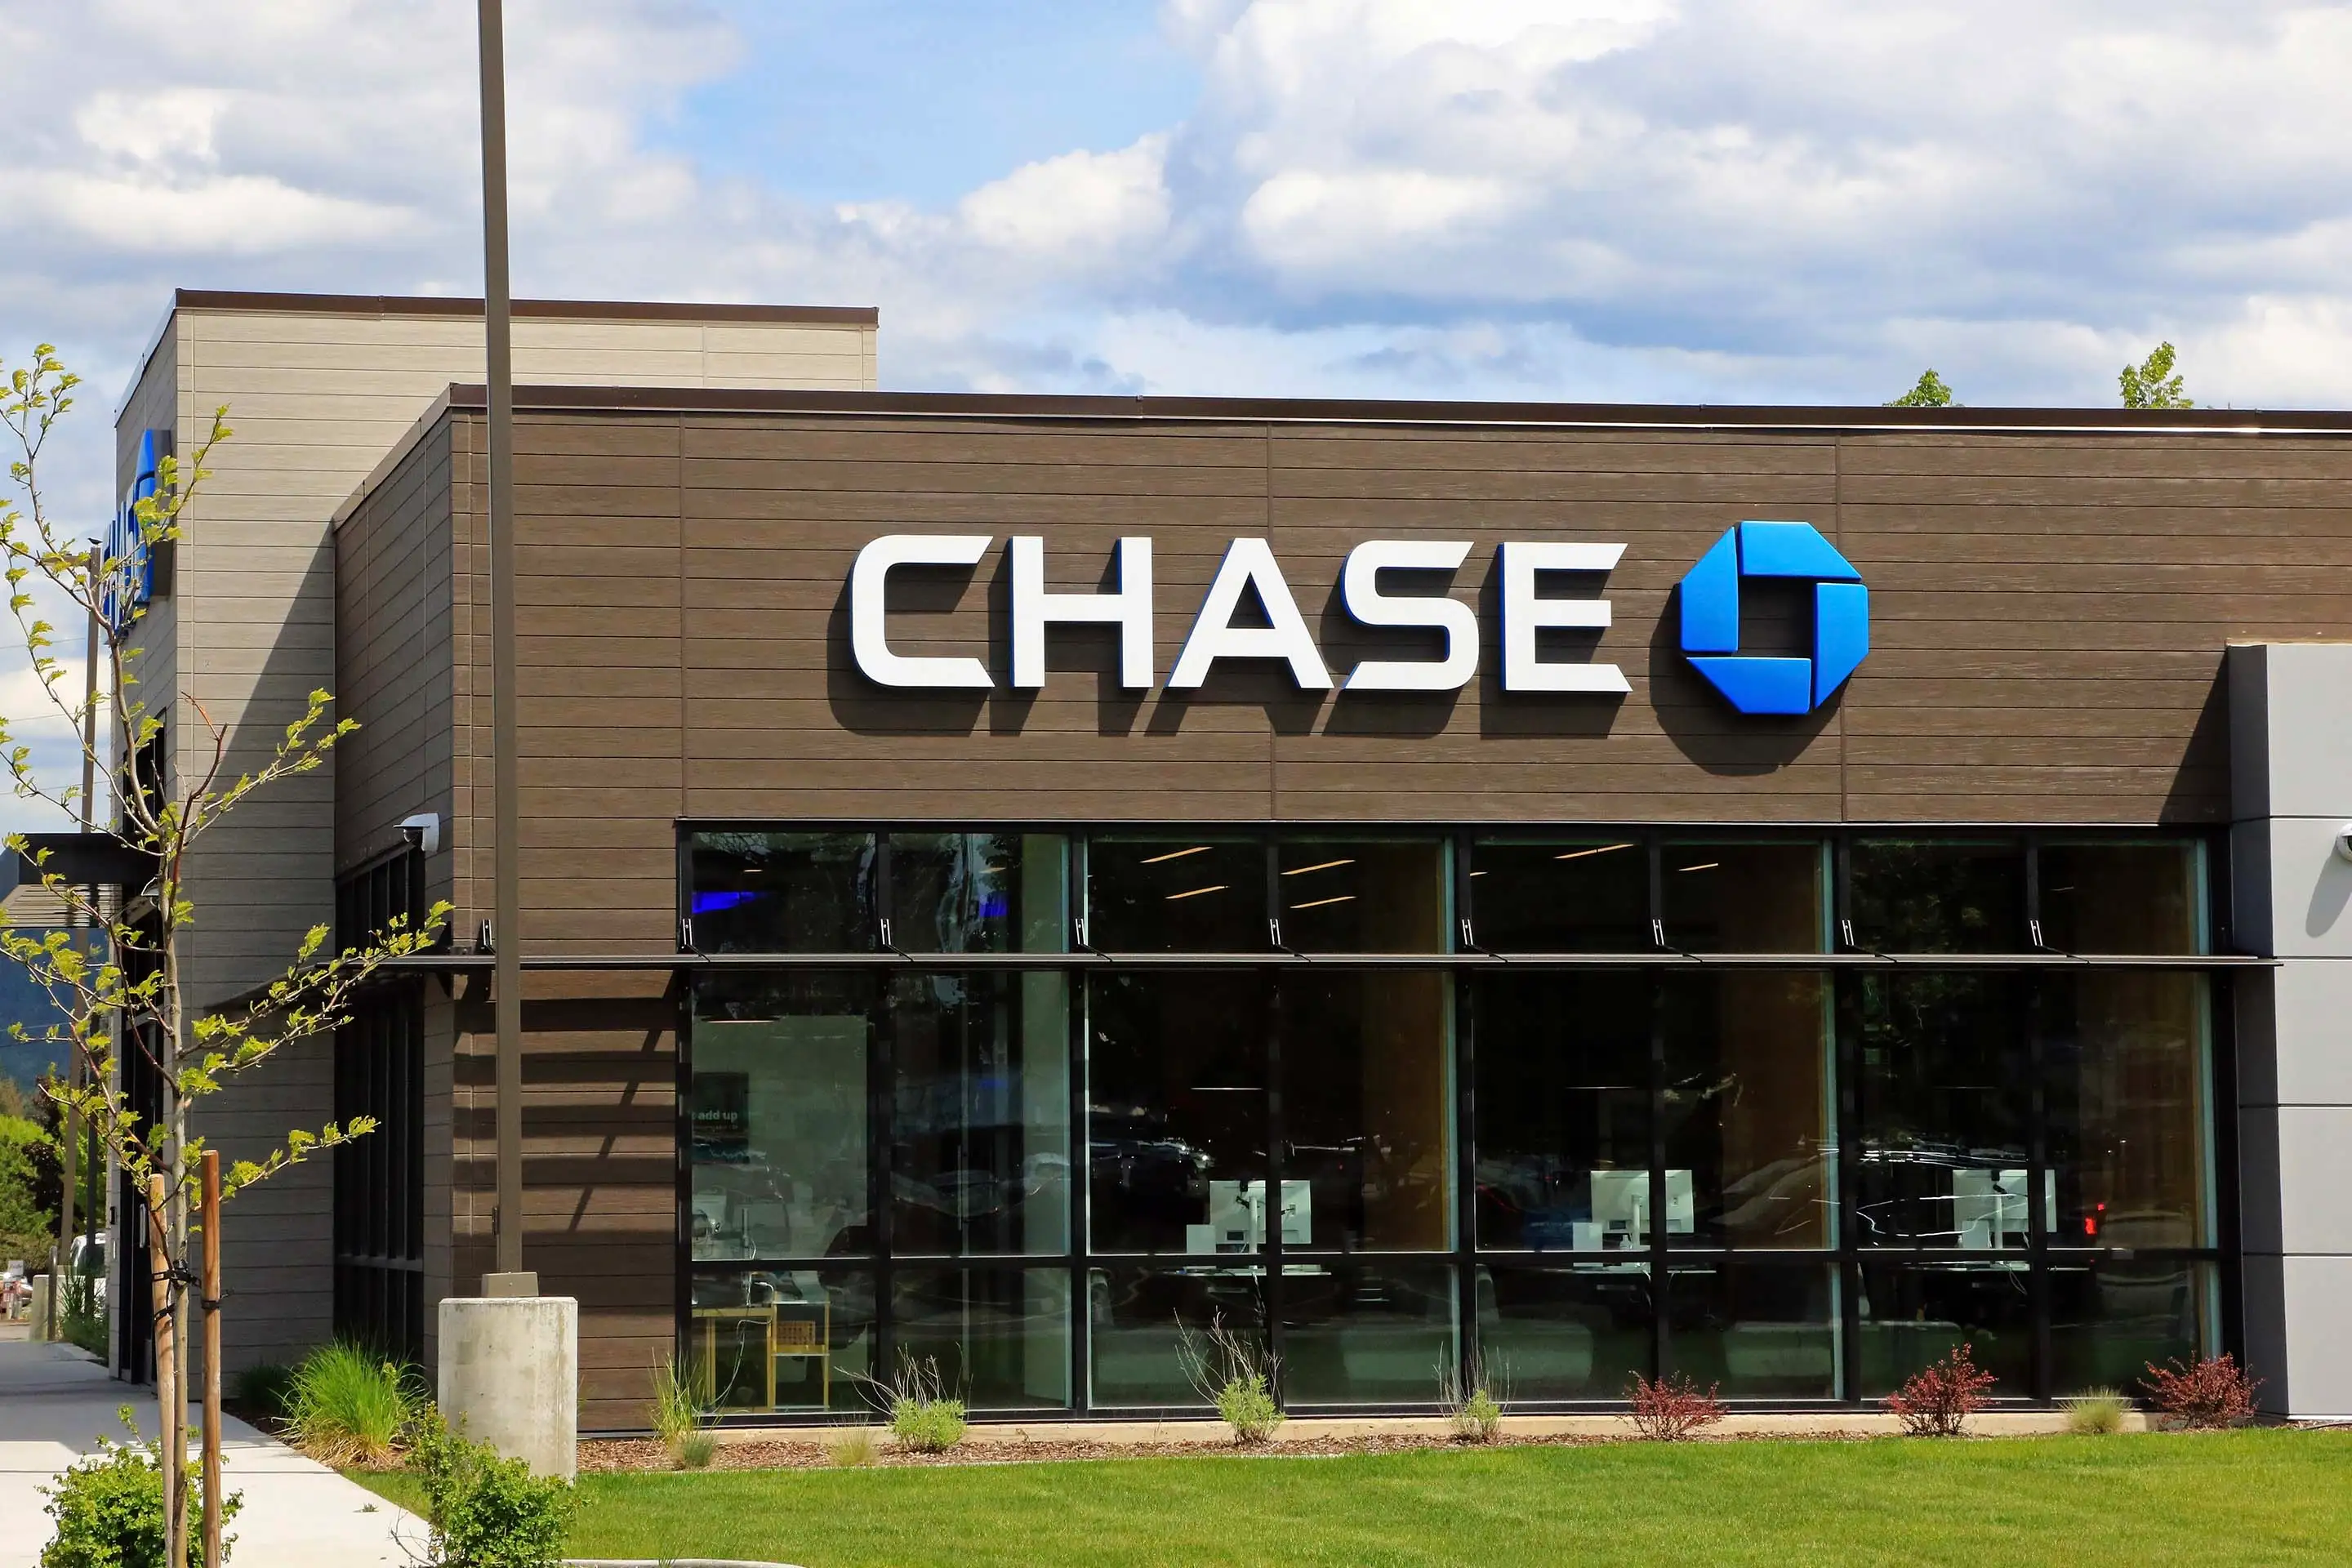 Chase bank building